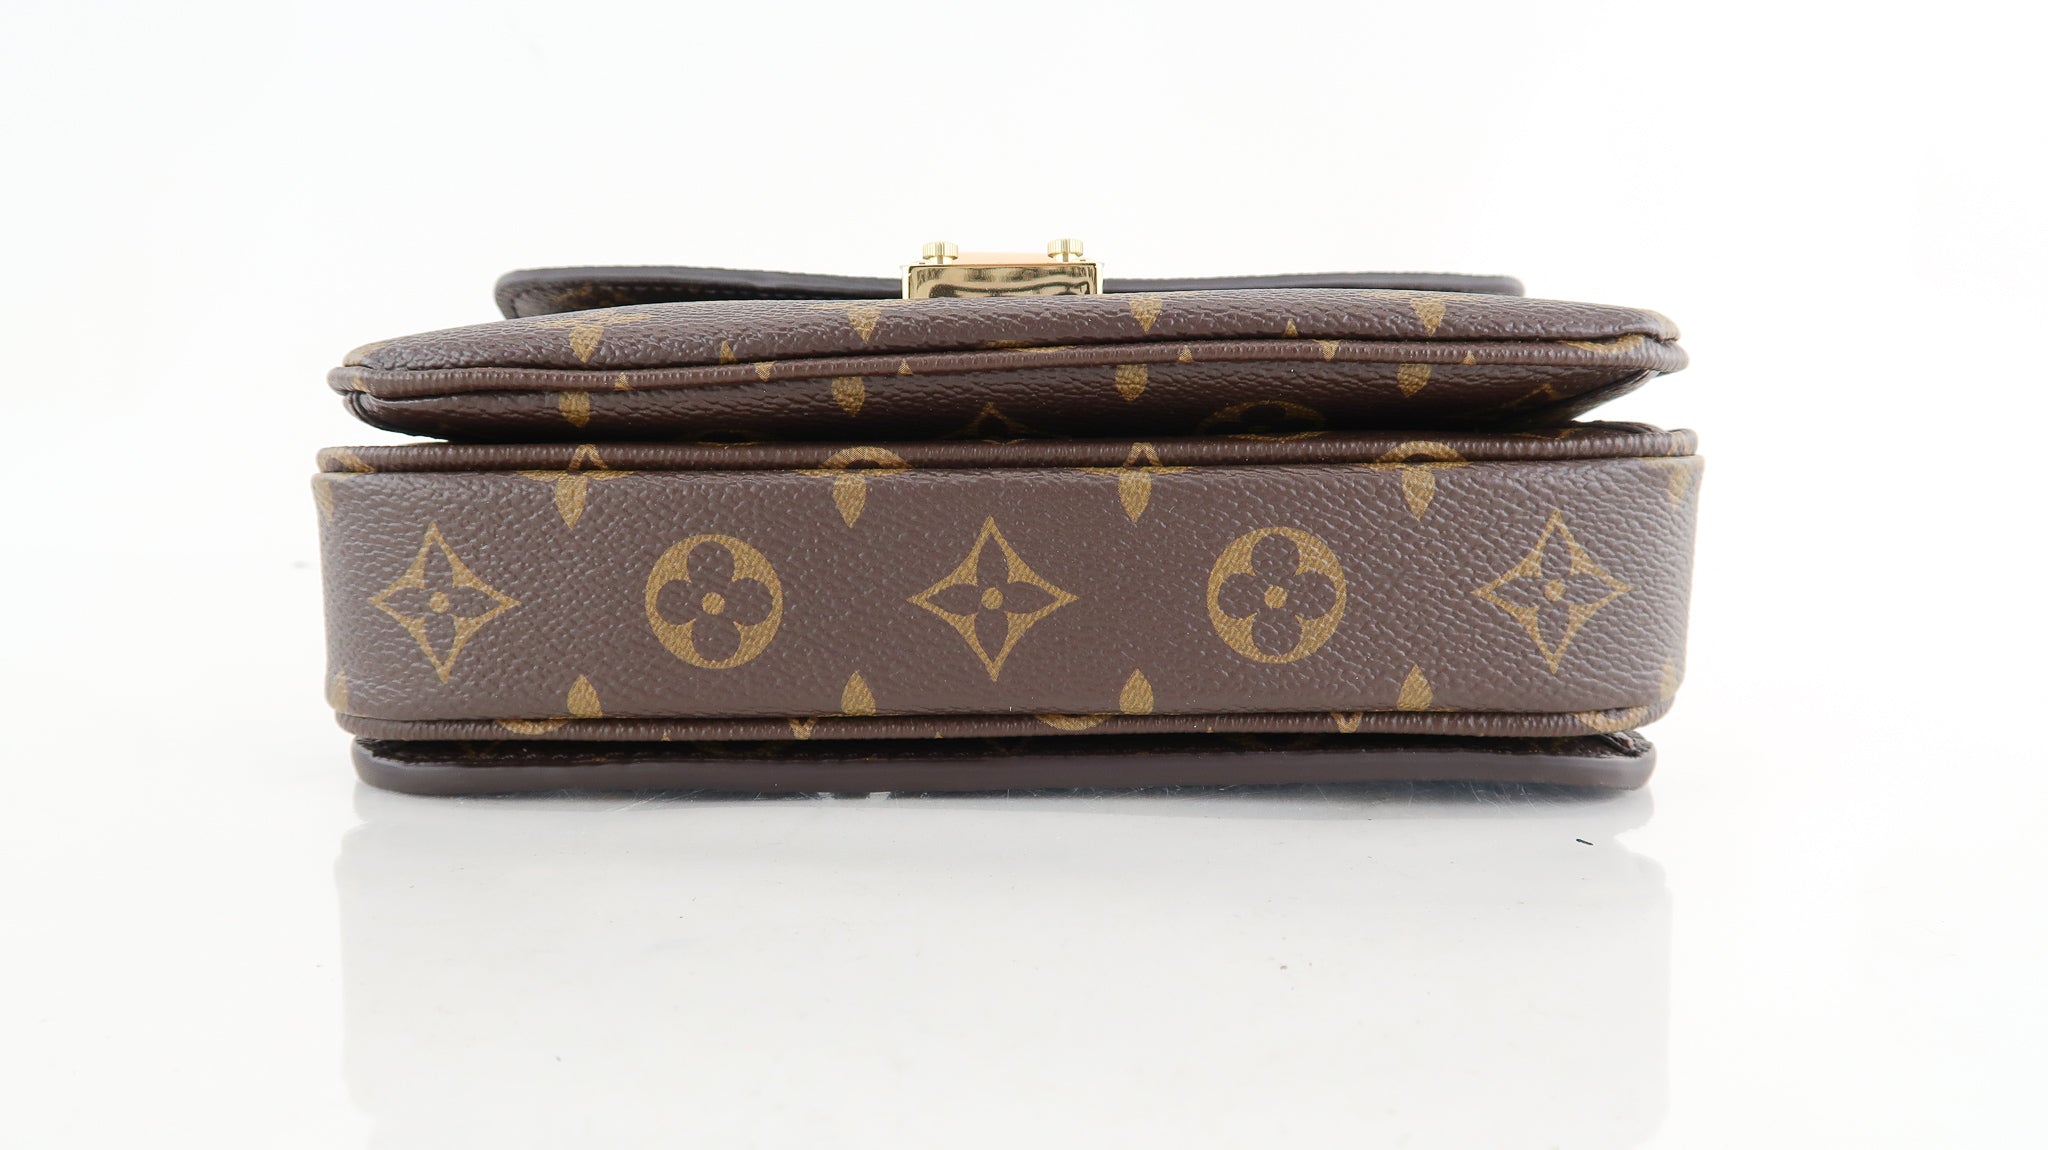 New East West Pochette Metis, 10/28 launch from Foxylv! Thoughts? :  r/Louisvuitton